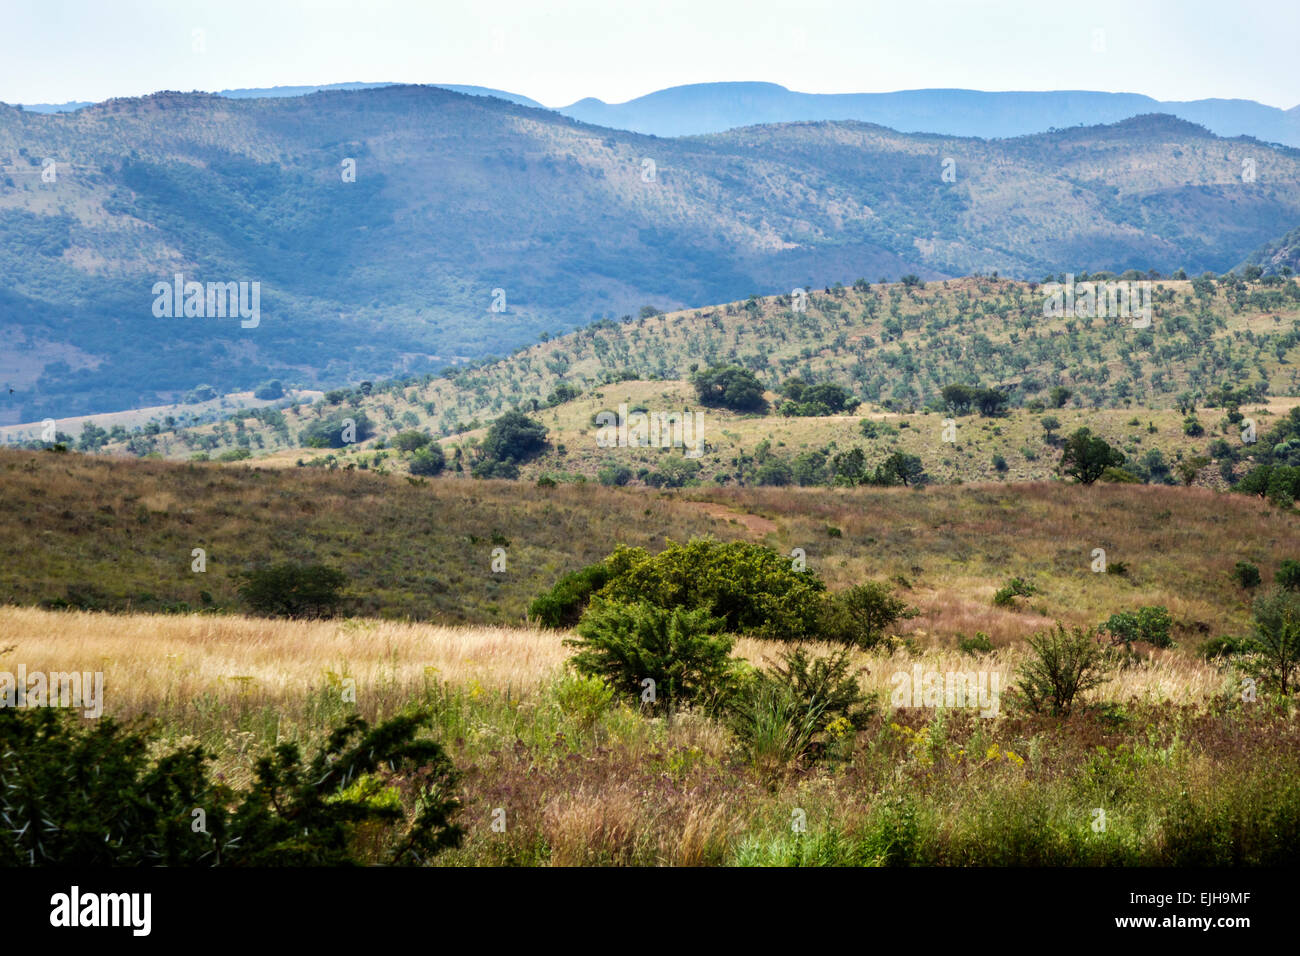 Johannesburg South Africa,Maropeng Visitors Centre,center,hominin,hominid site,human ancestor,Cradle of Humankind World Heritage Site,view,nature,natu Stock Photo